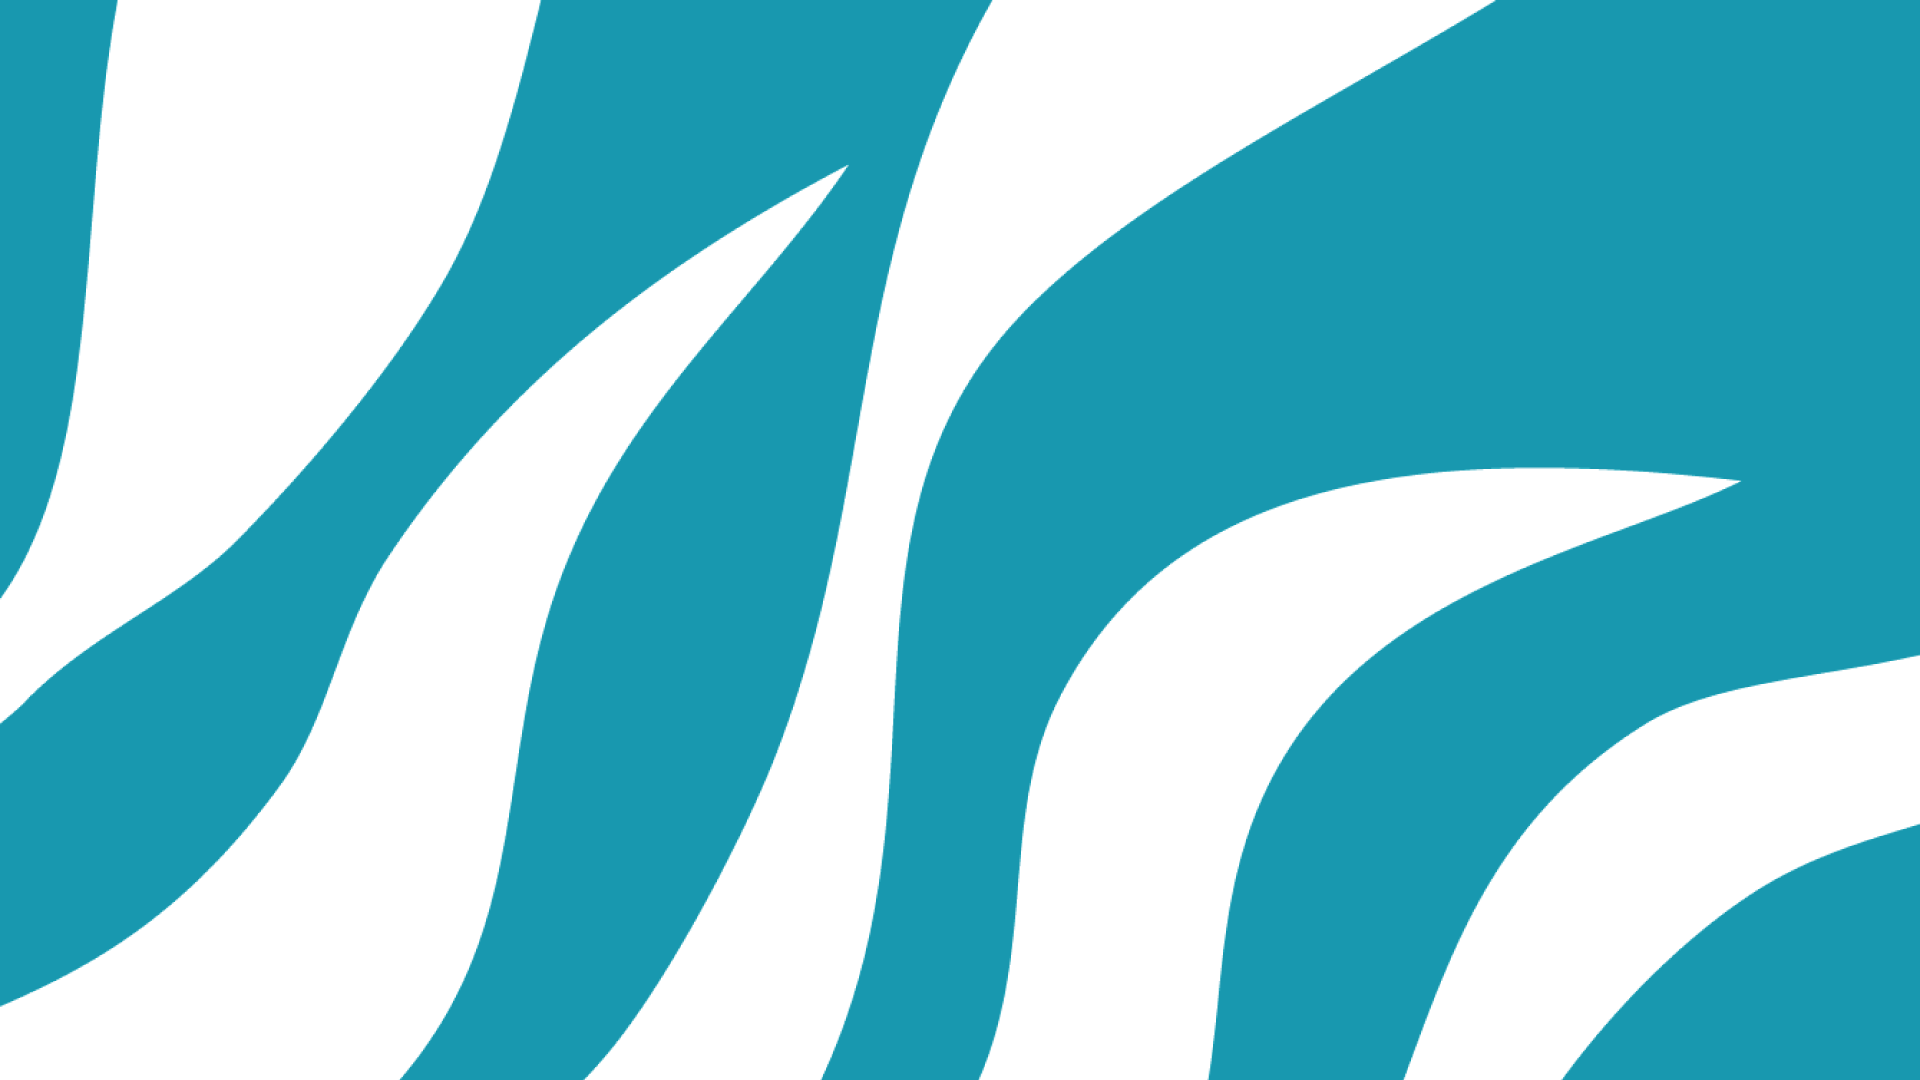 white fluid stripes on teal background for graphic design project